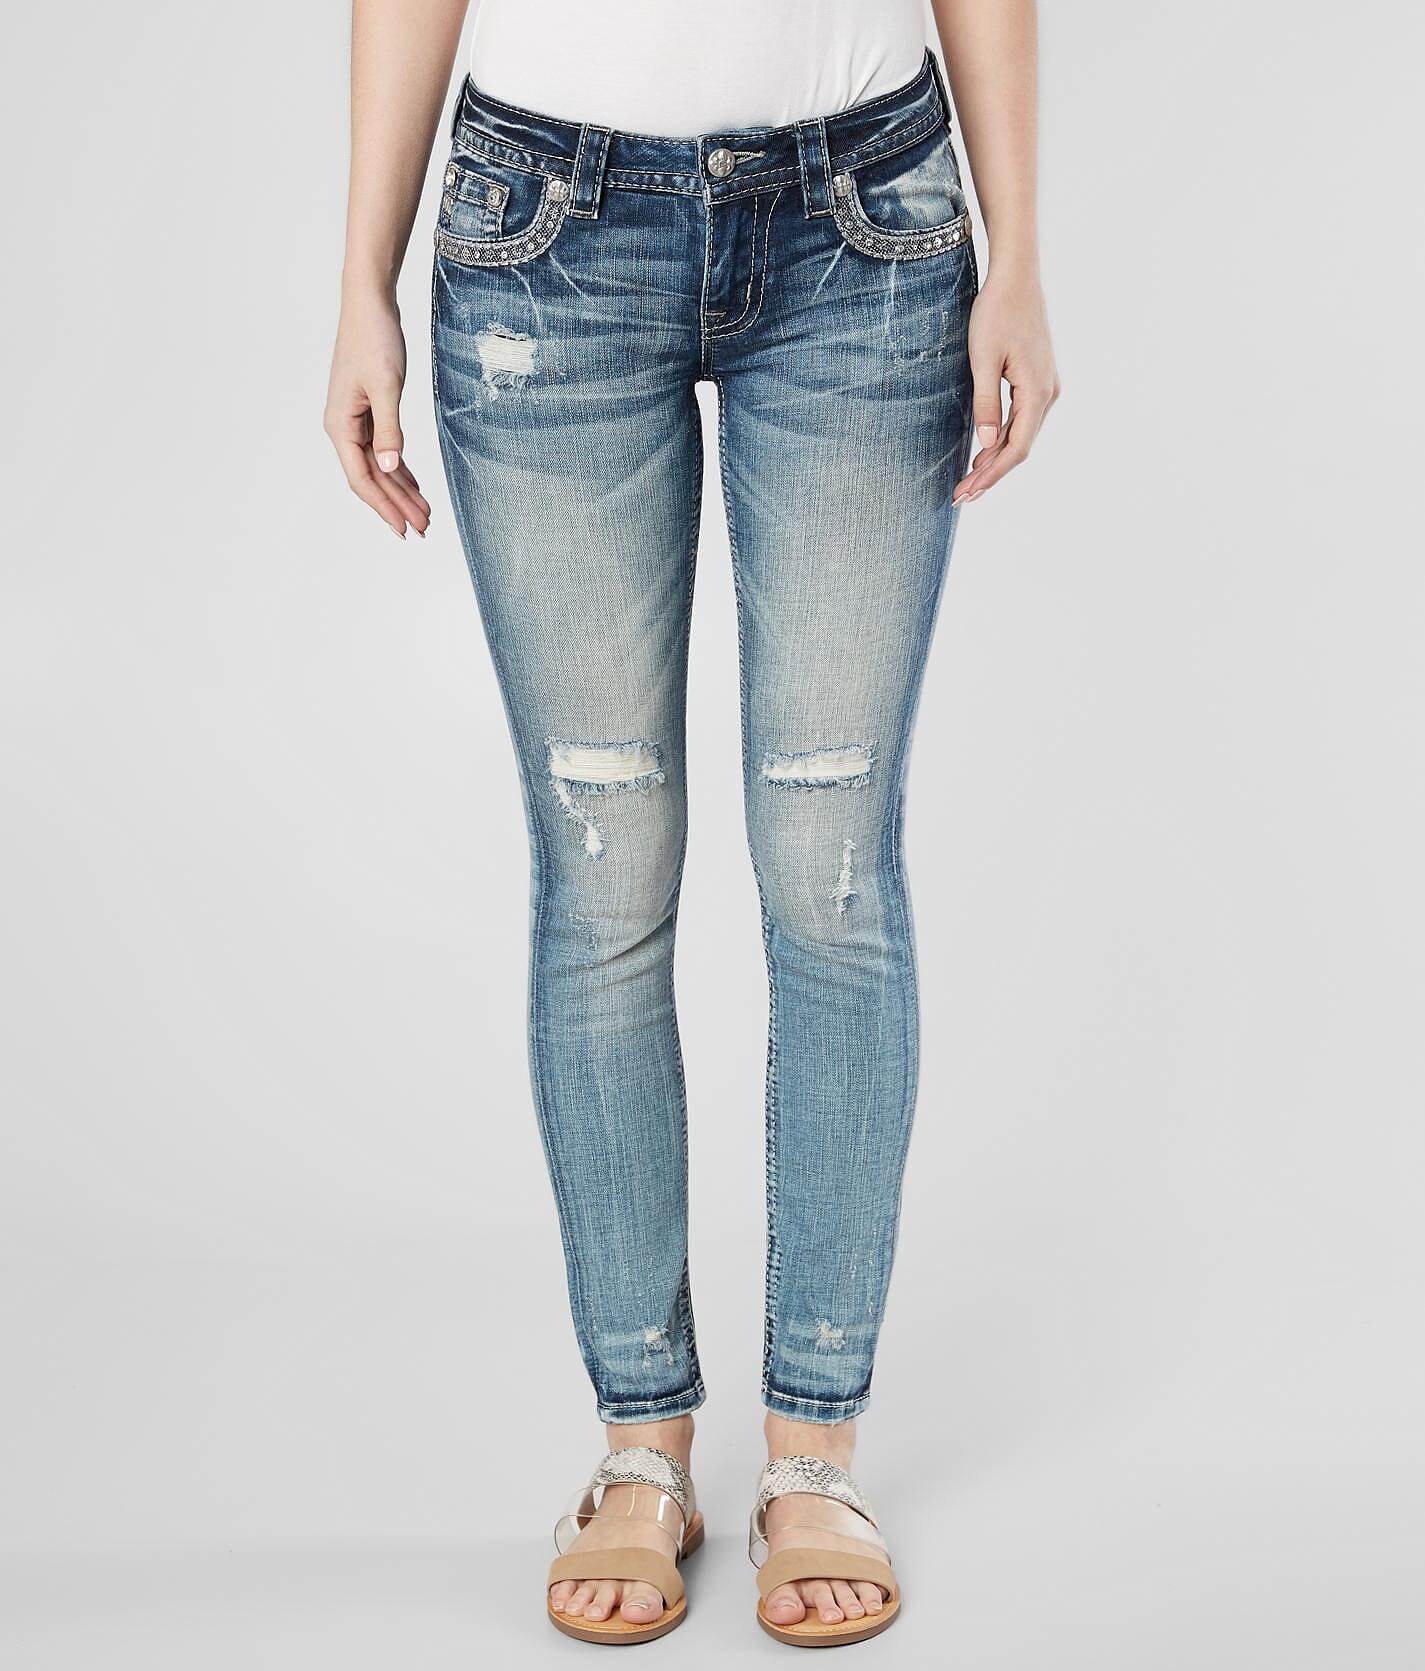 miss me low rise skinny jeans